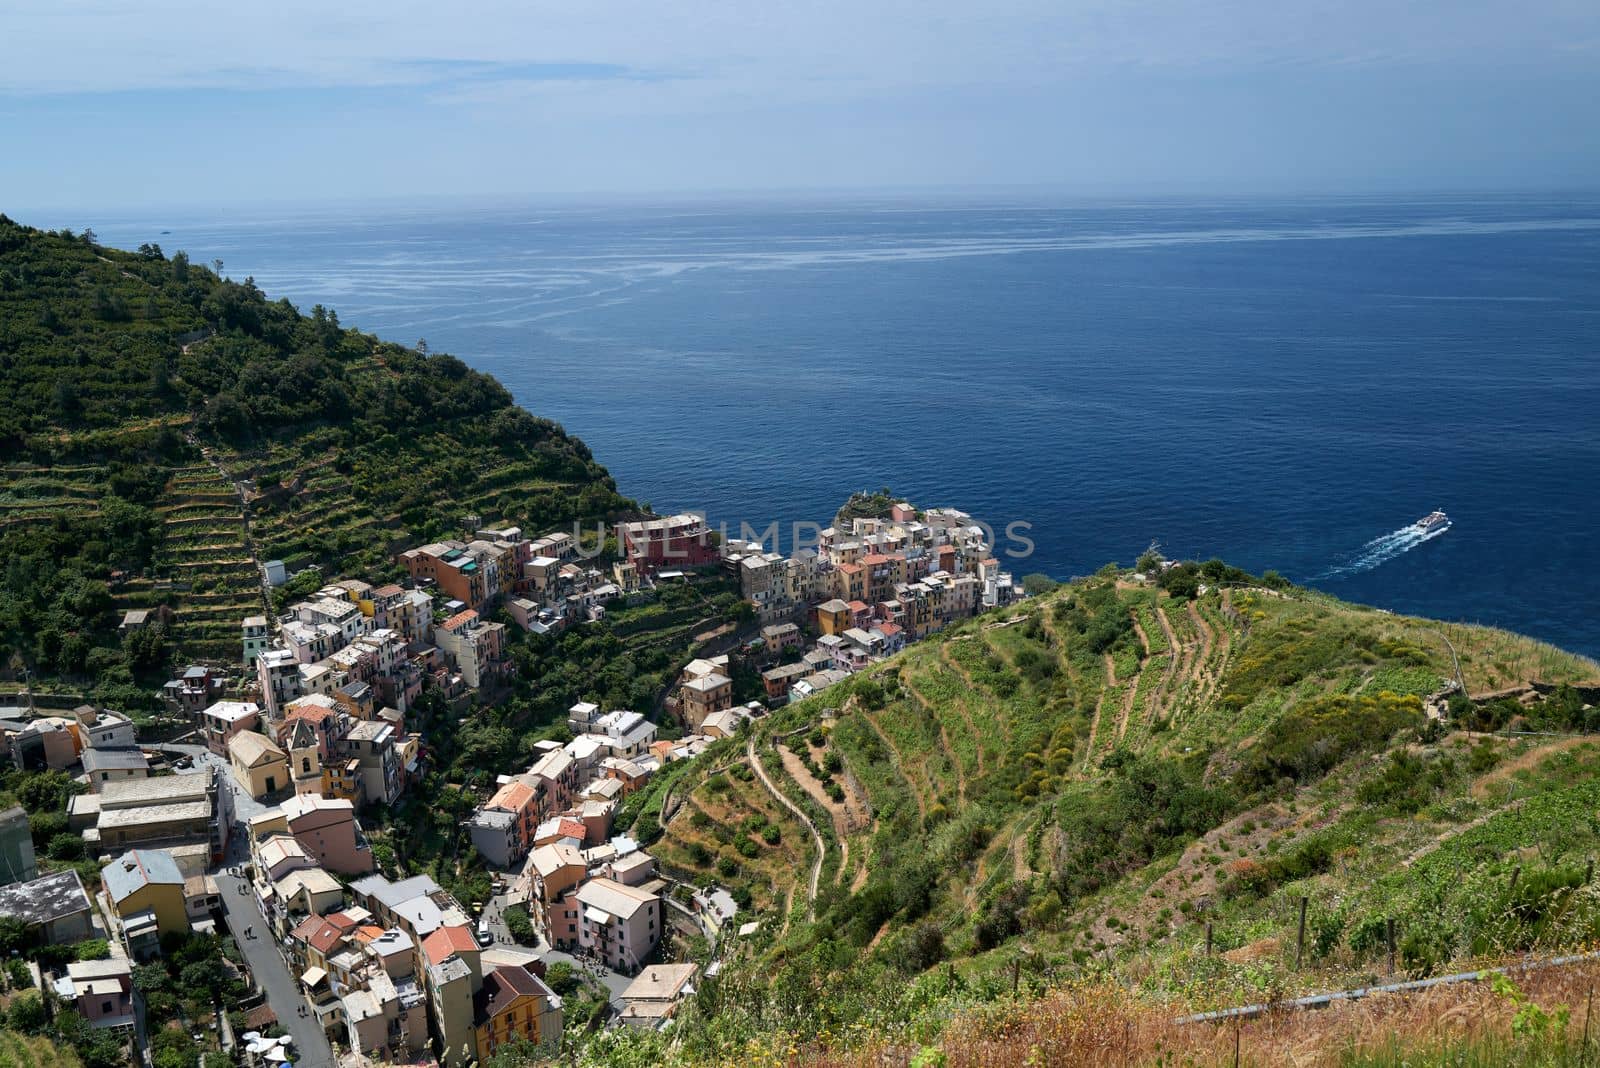 One of the famous villages in the Cinque Terre region by Pammy1140